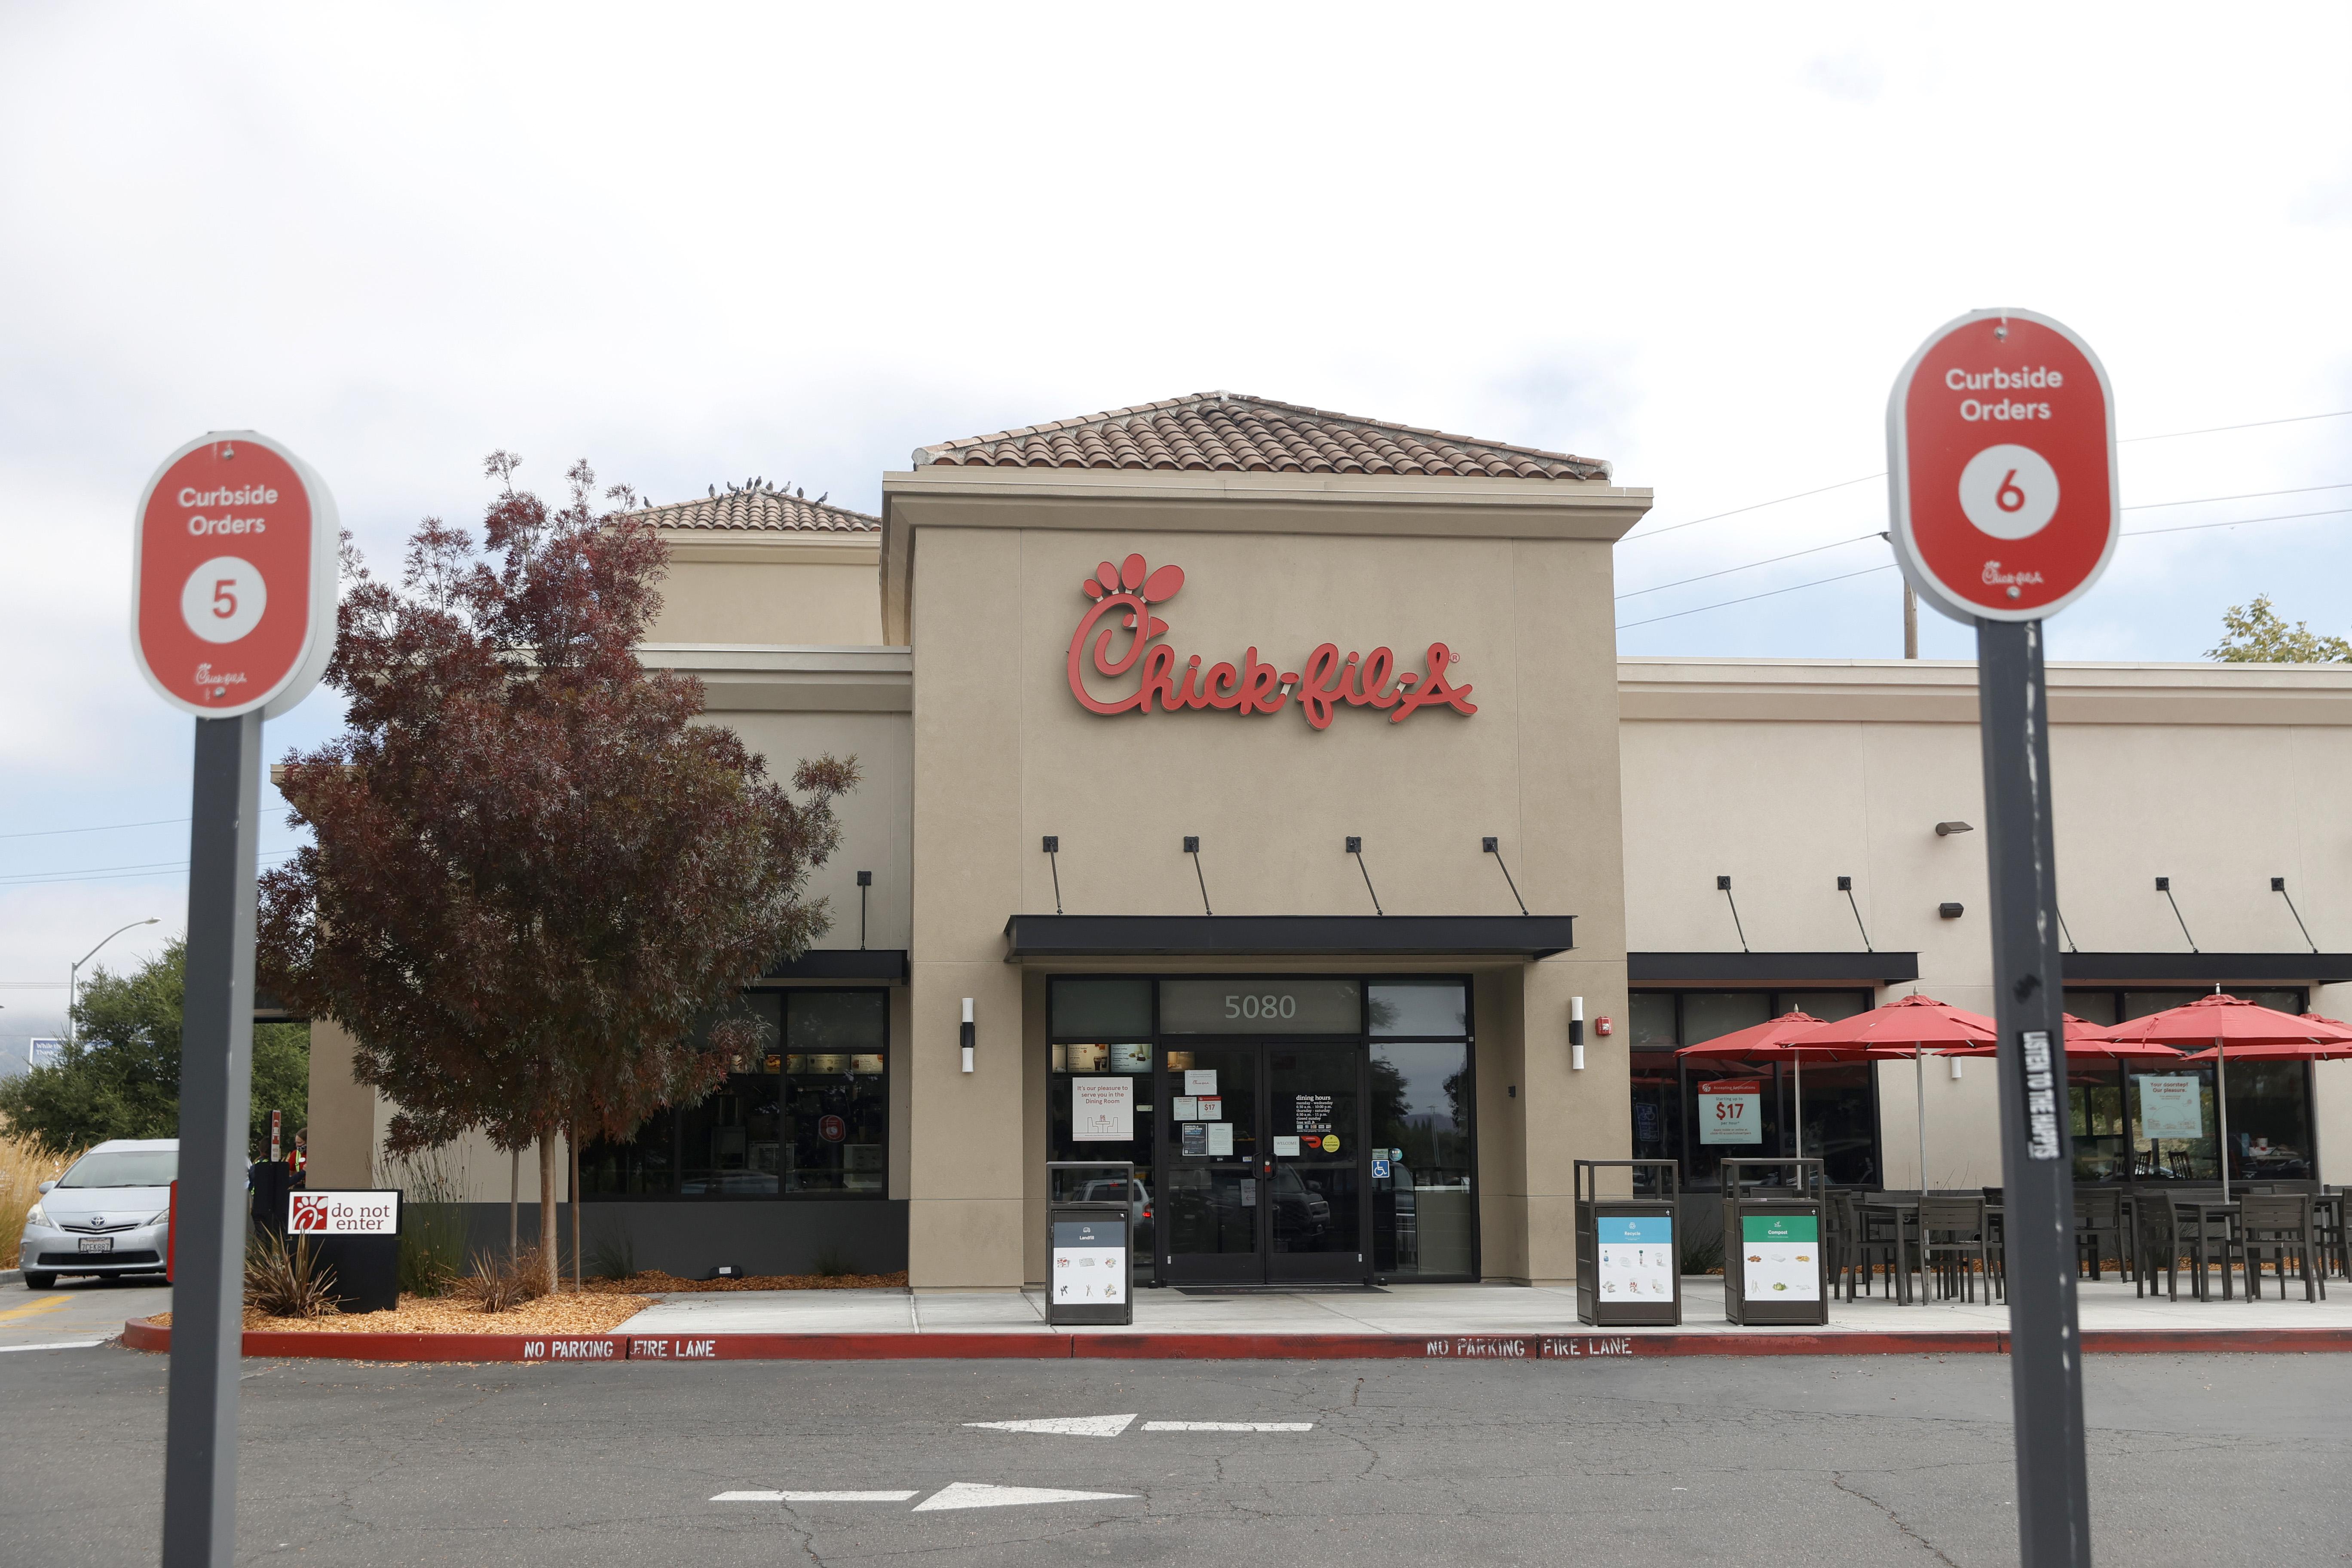 Exterior of a Chick-fil-A in Rohnert Park, California